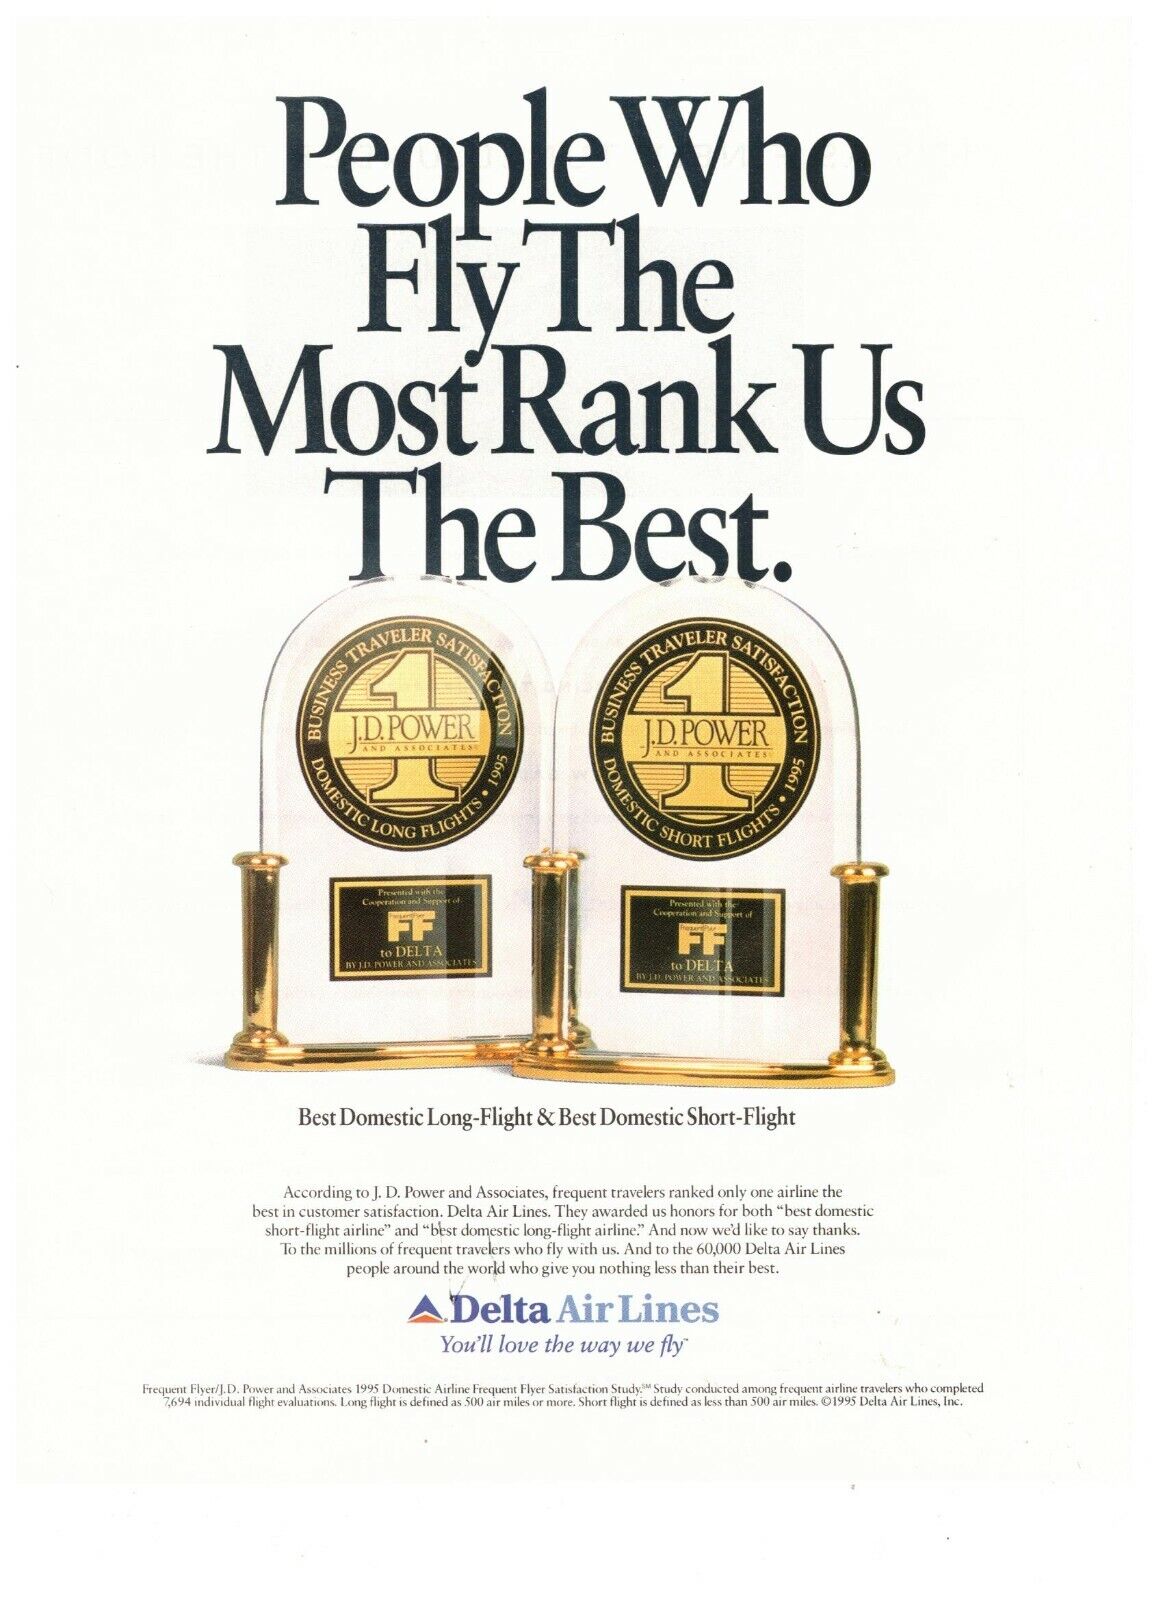 Delta Airlines JD Power Awards People Who Fly the Most Vintage 1996 Print Ad